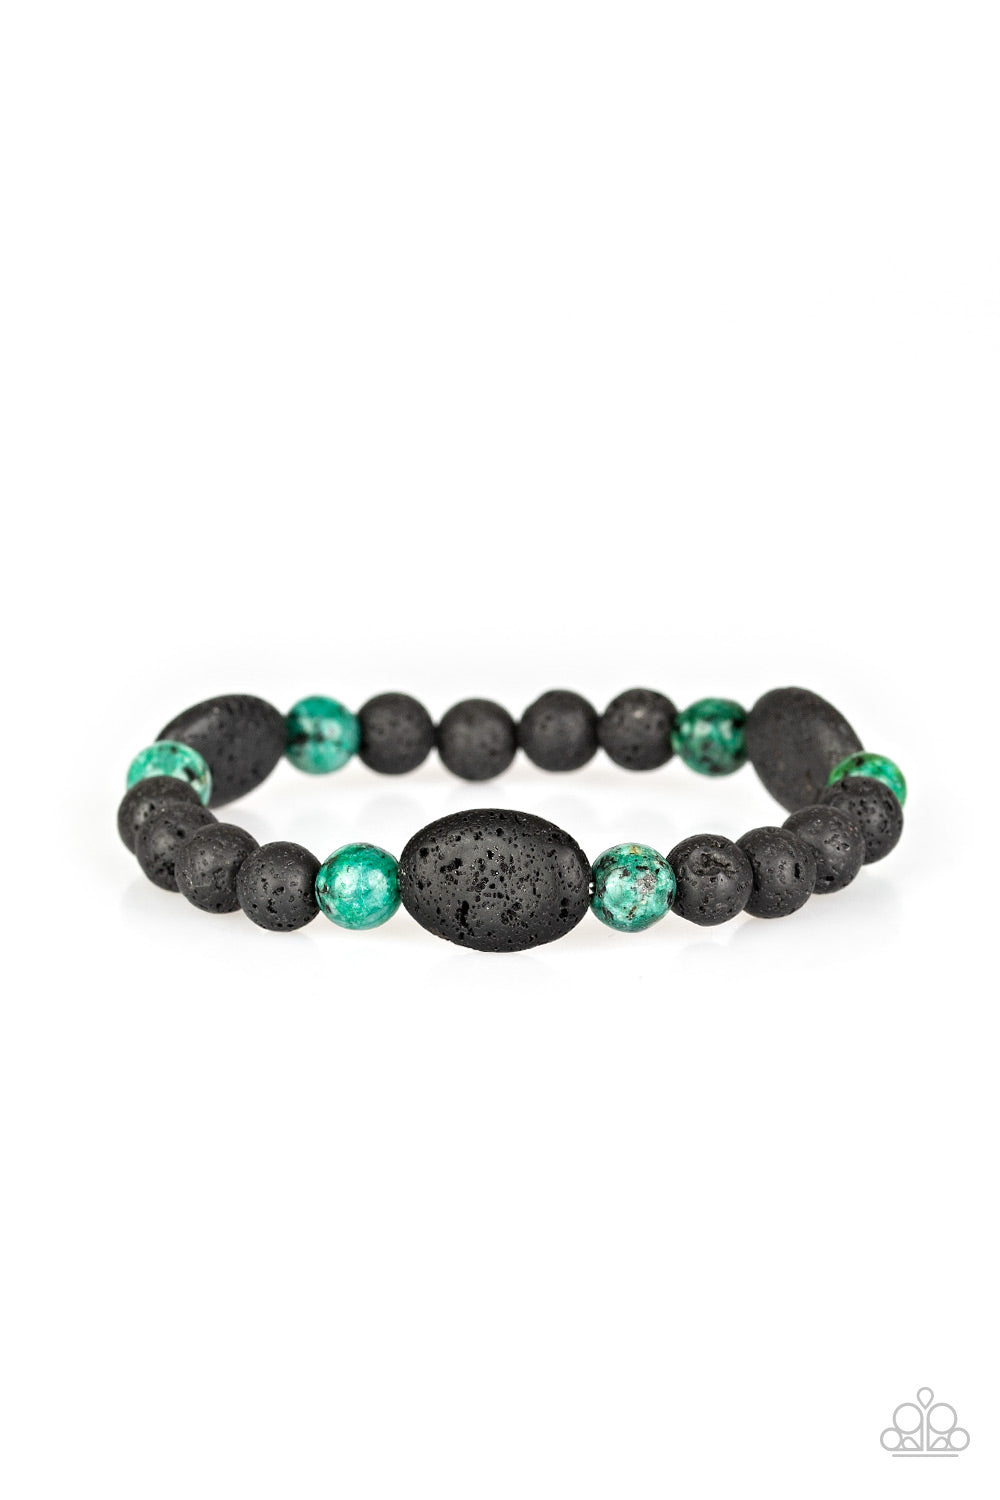 A collection of black lava rocks and earthy green stone beads are threaded along a stretchy band around the wrist for a seasonal look. Sold as one individual bracelet.